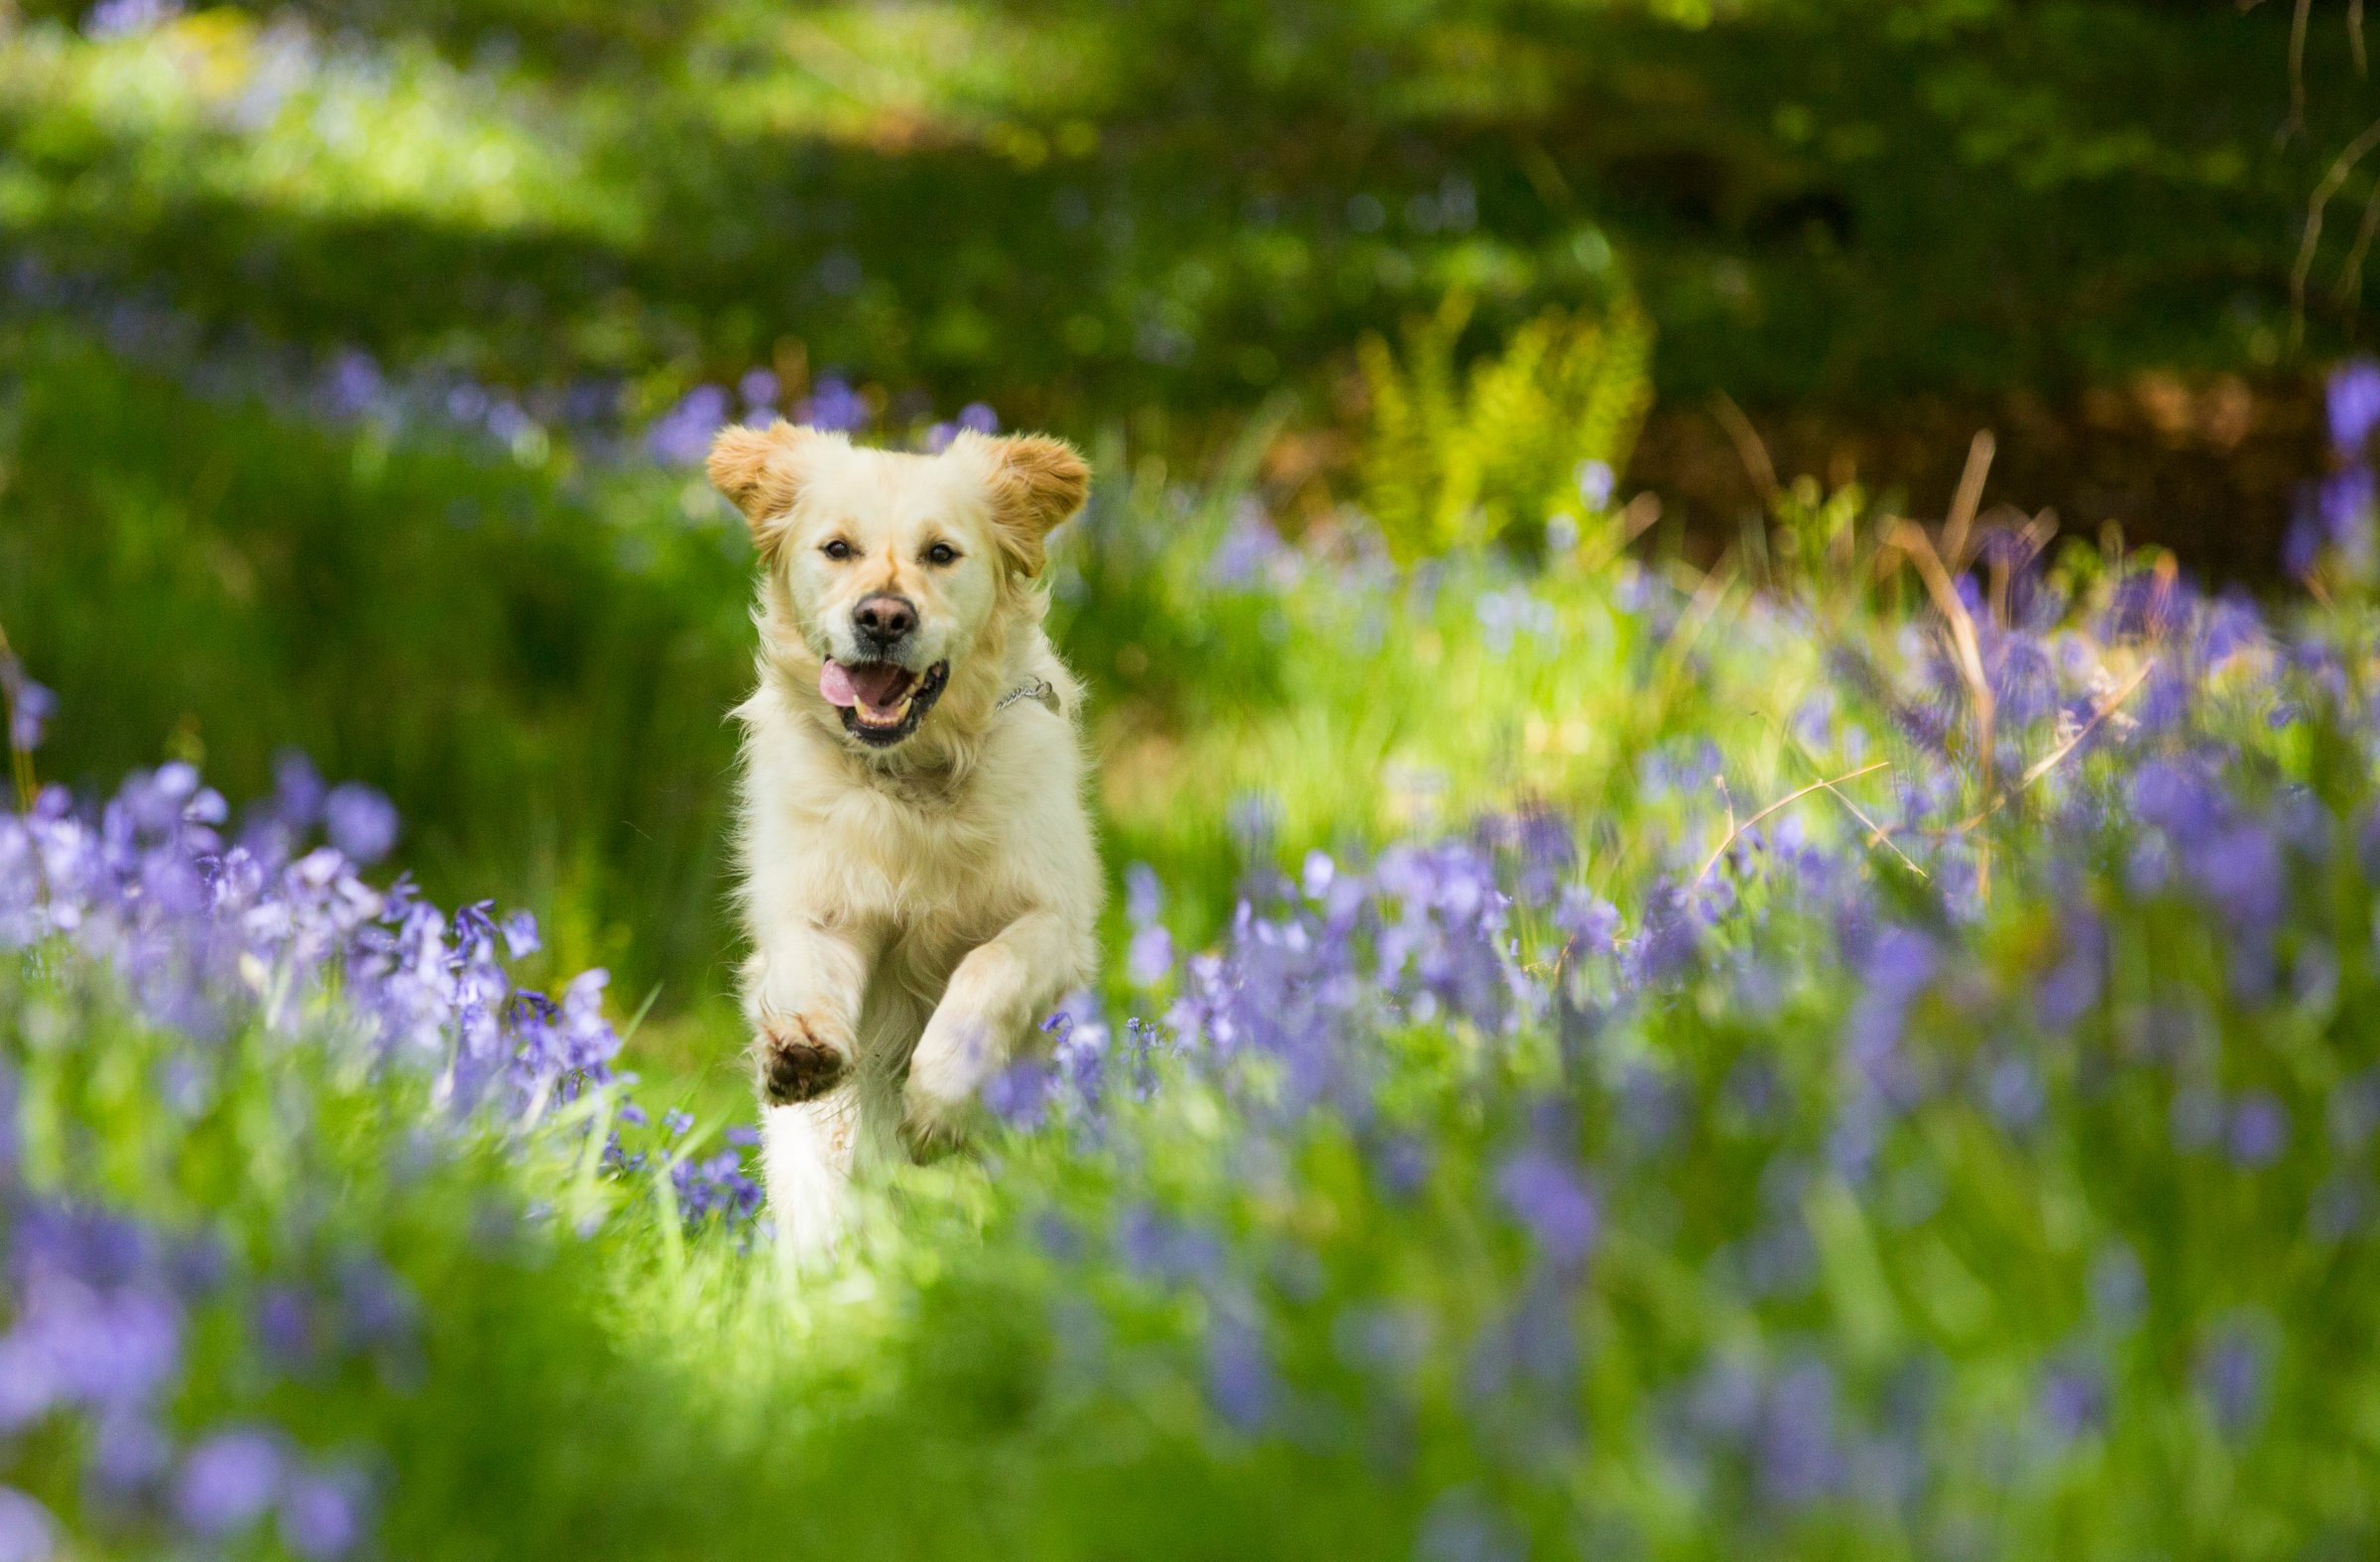 A Golden Retriever dog running through Bluebells in Jiffy Knotts wood in Lake District on May 20, 2015 in Ambleside, England. The native British Bluebell is threatened by the highly invasive Spanish Bluebell. PHOTOGRAPH BY Ashley Cooper / Barcroft Media (Photo credit should read Ashley Cooper / Barcroft Media via Getty Images)